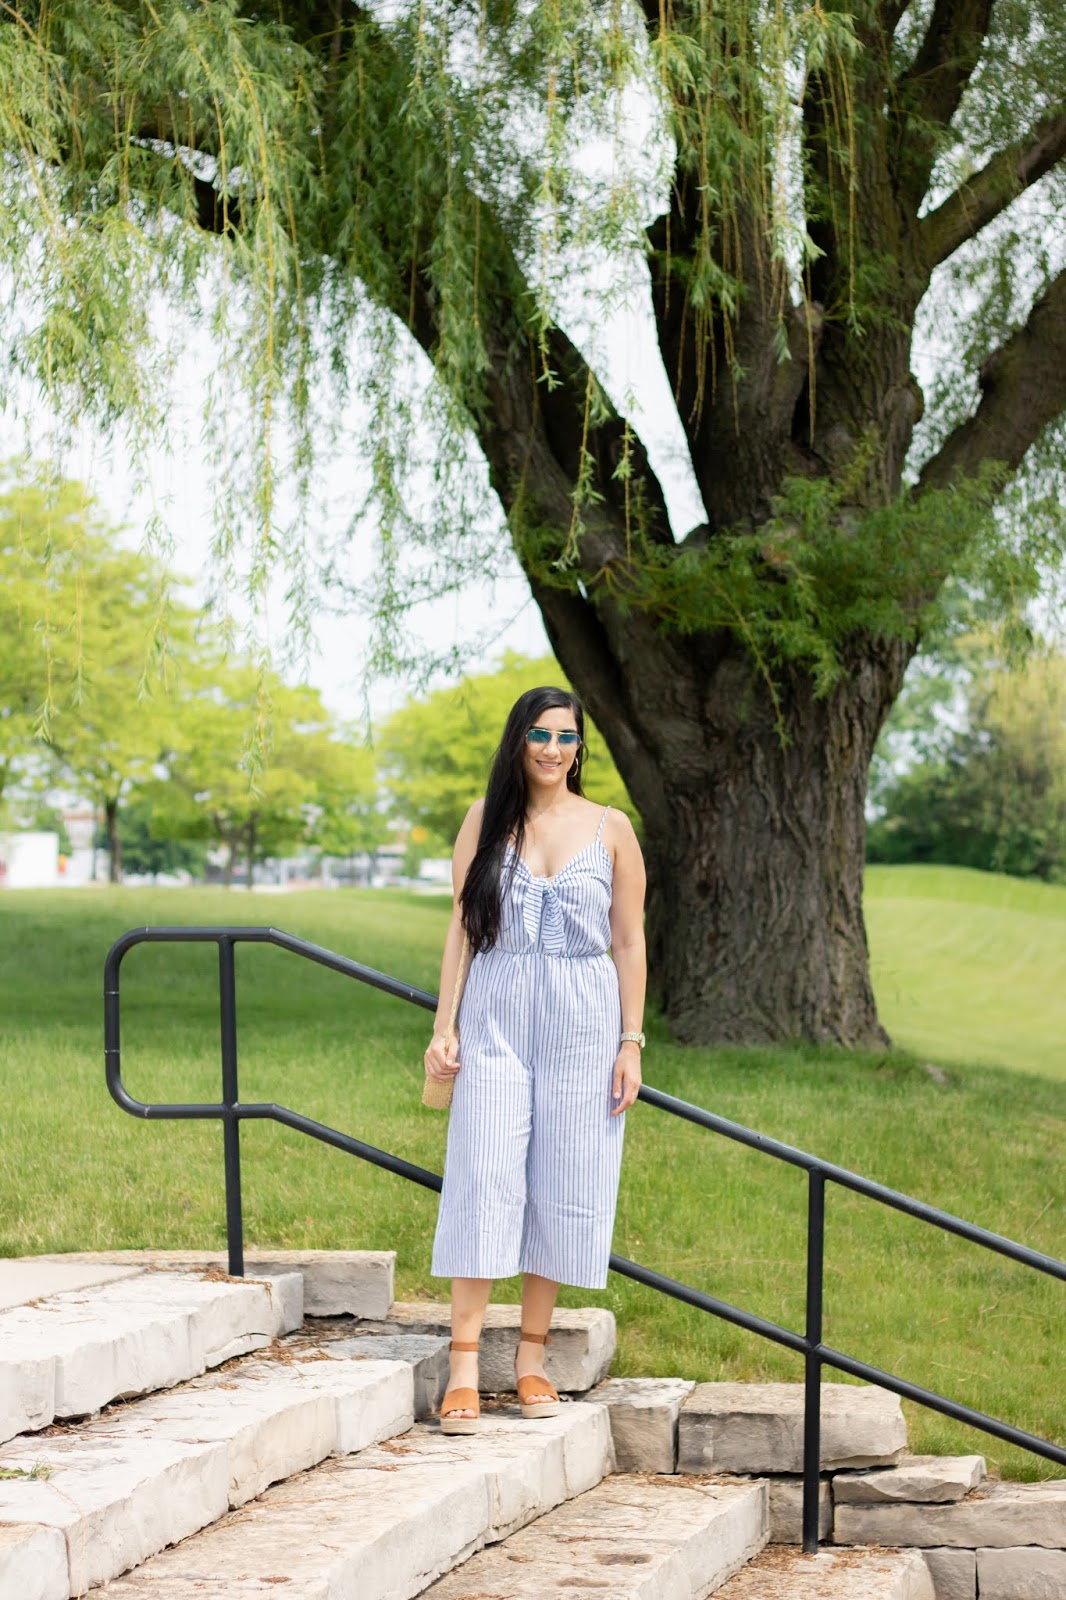 Danielle's Fashion & Lifestyle Blog: How to find the right jumpsuit for ...